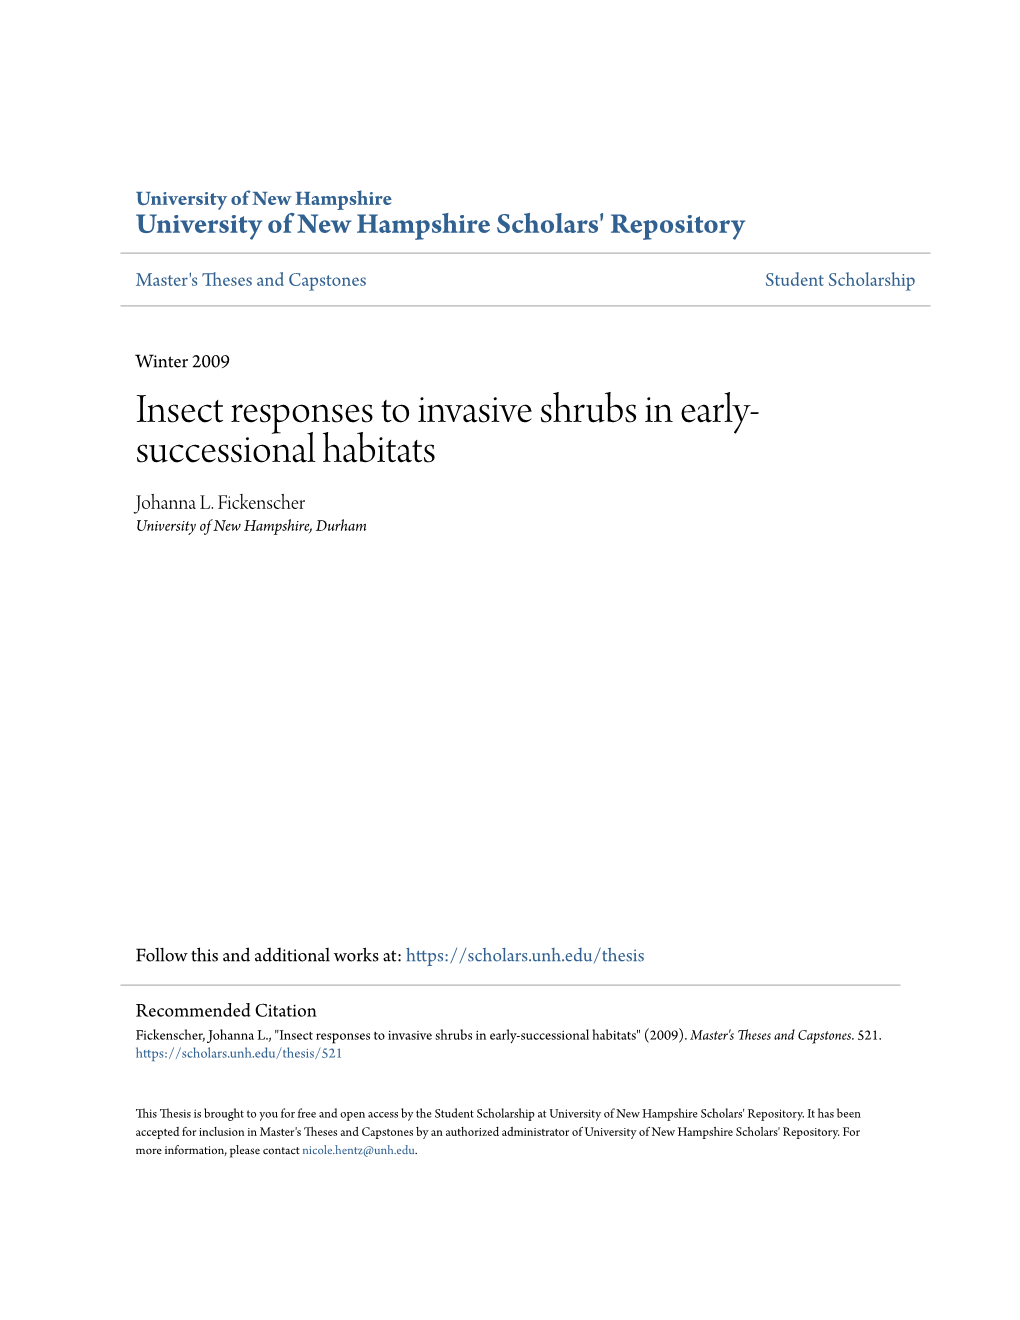 Insect Responses to Invasive Shrubs in Early-Successional Habitats" (2009)